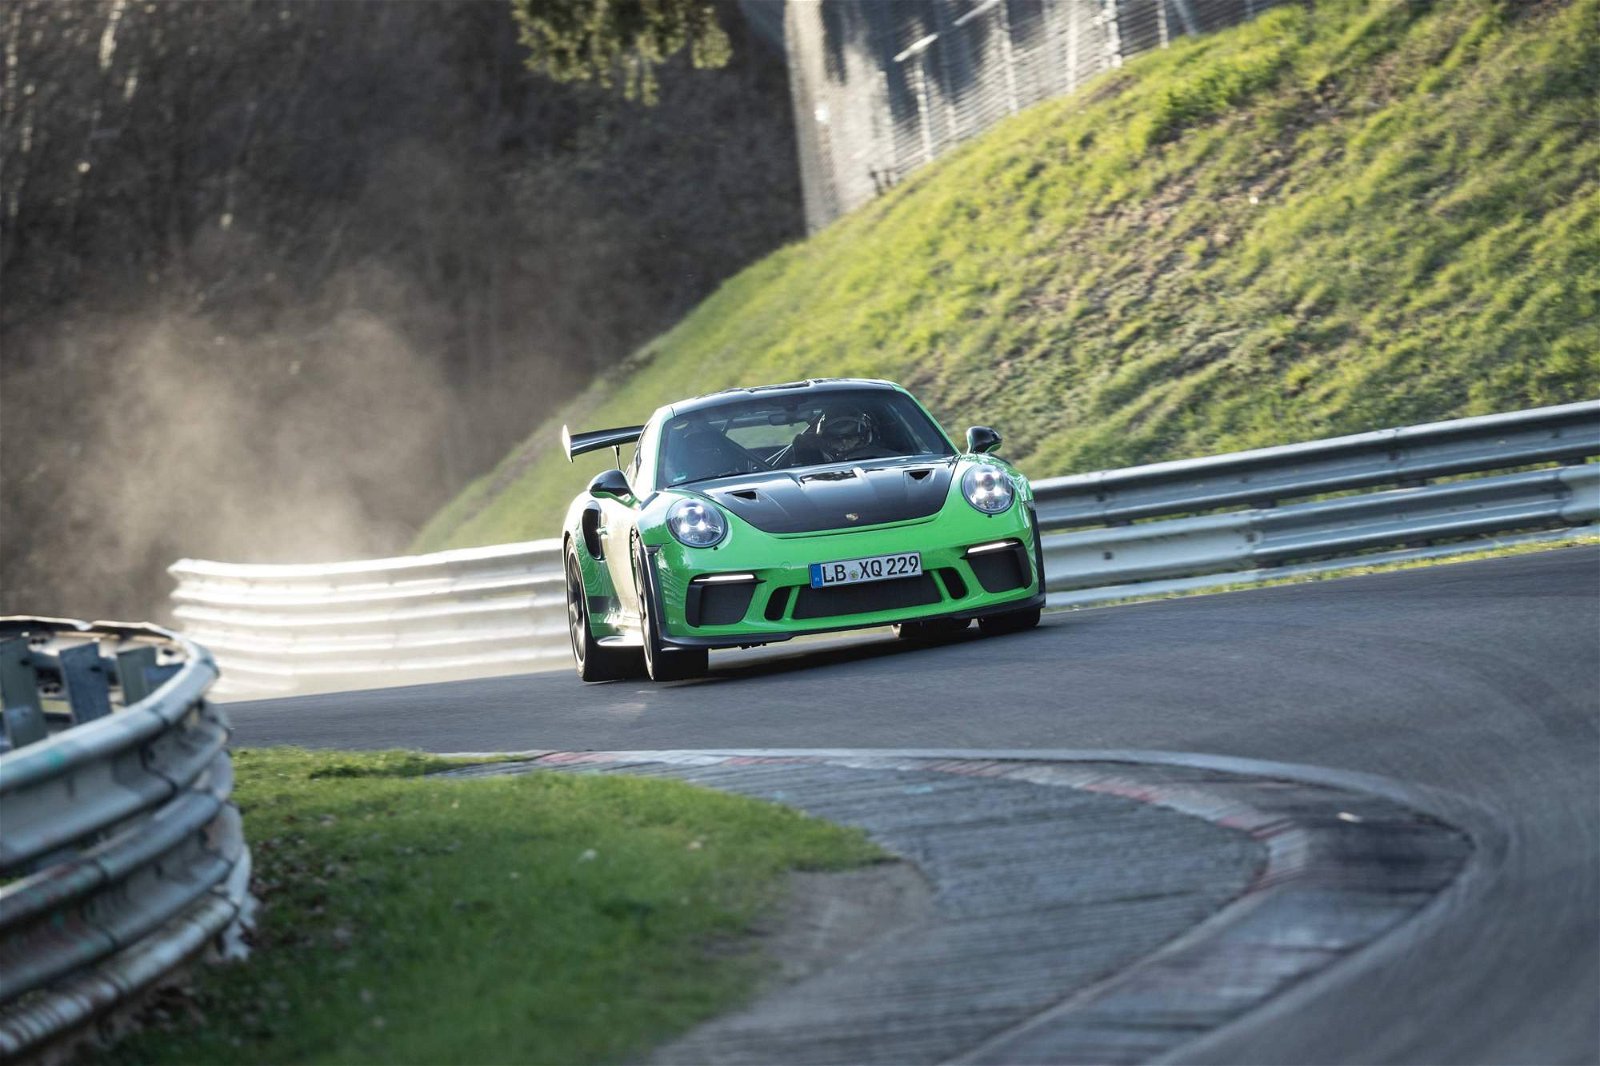 2018-Porsche-911-GT3-RS-at-the-Nurburgring-Nordschleife-6